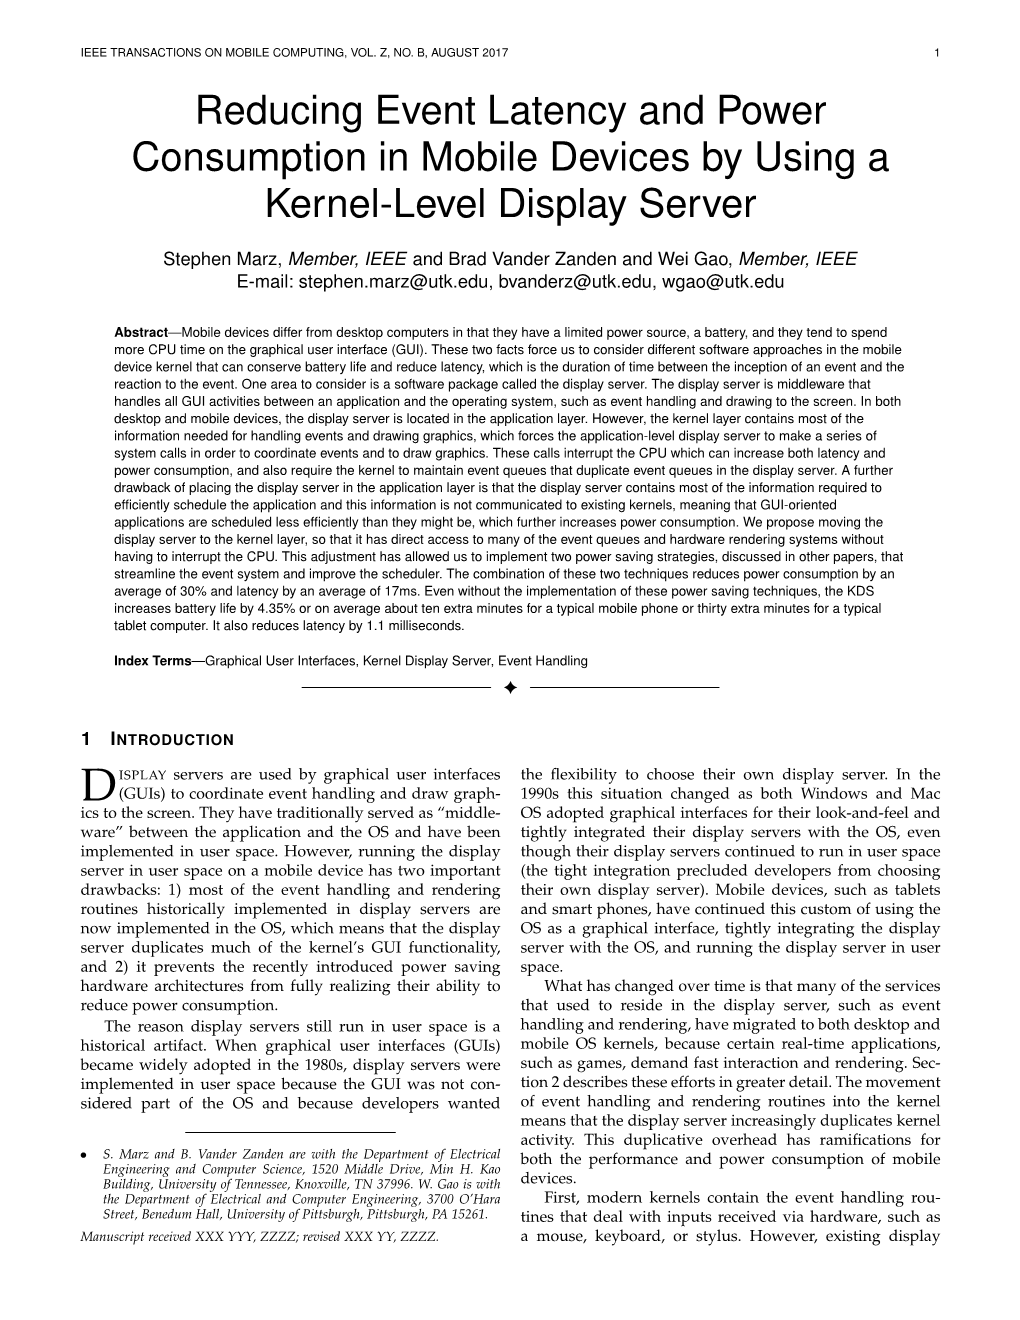 Reducing Power Consumption in Mobile Devices by Using a Kernel